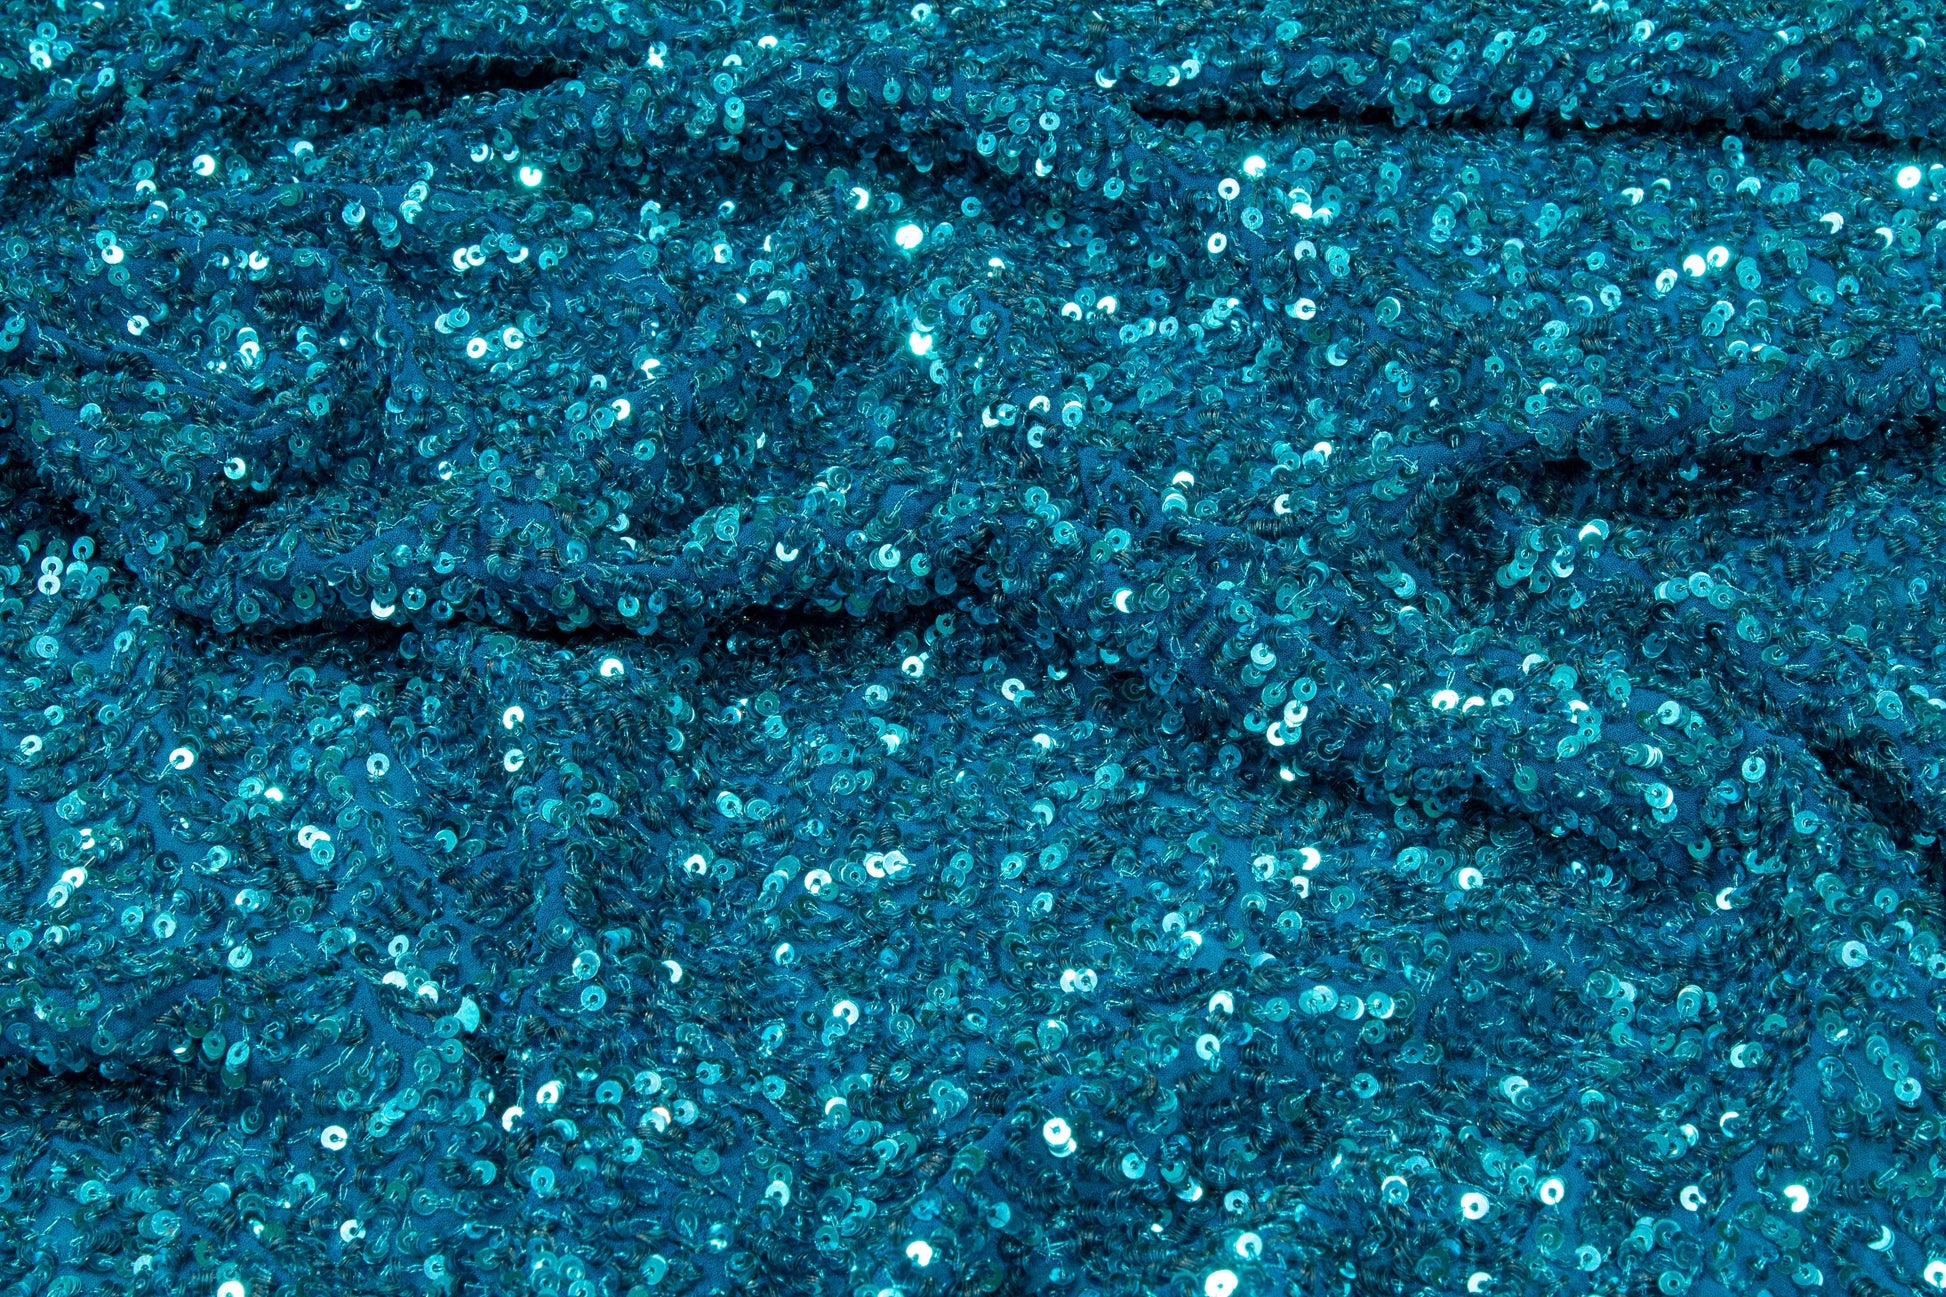 Hand Sequined Rayon Georgette - Turquoise - Prime Fabrics